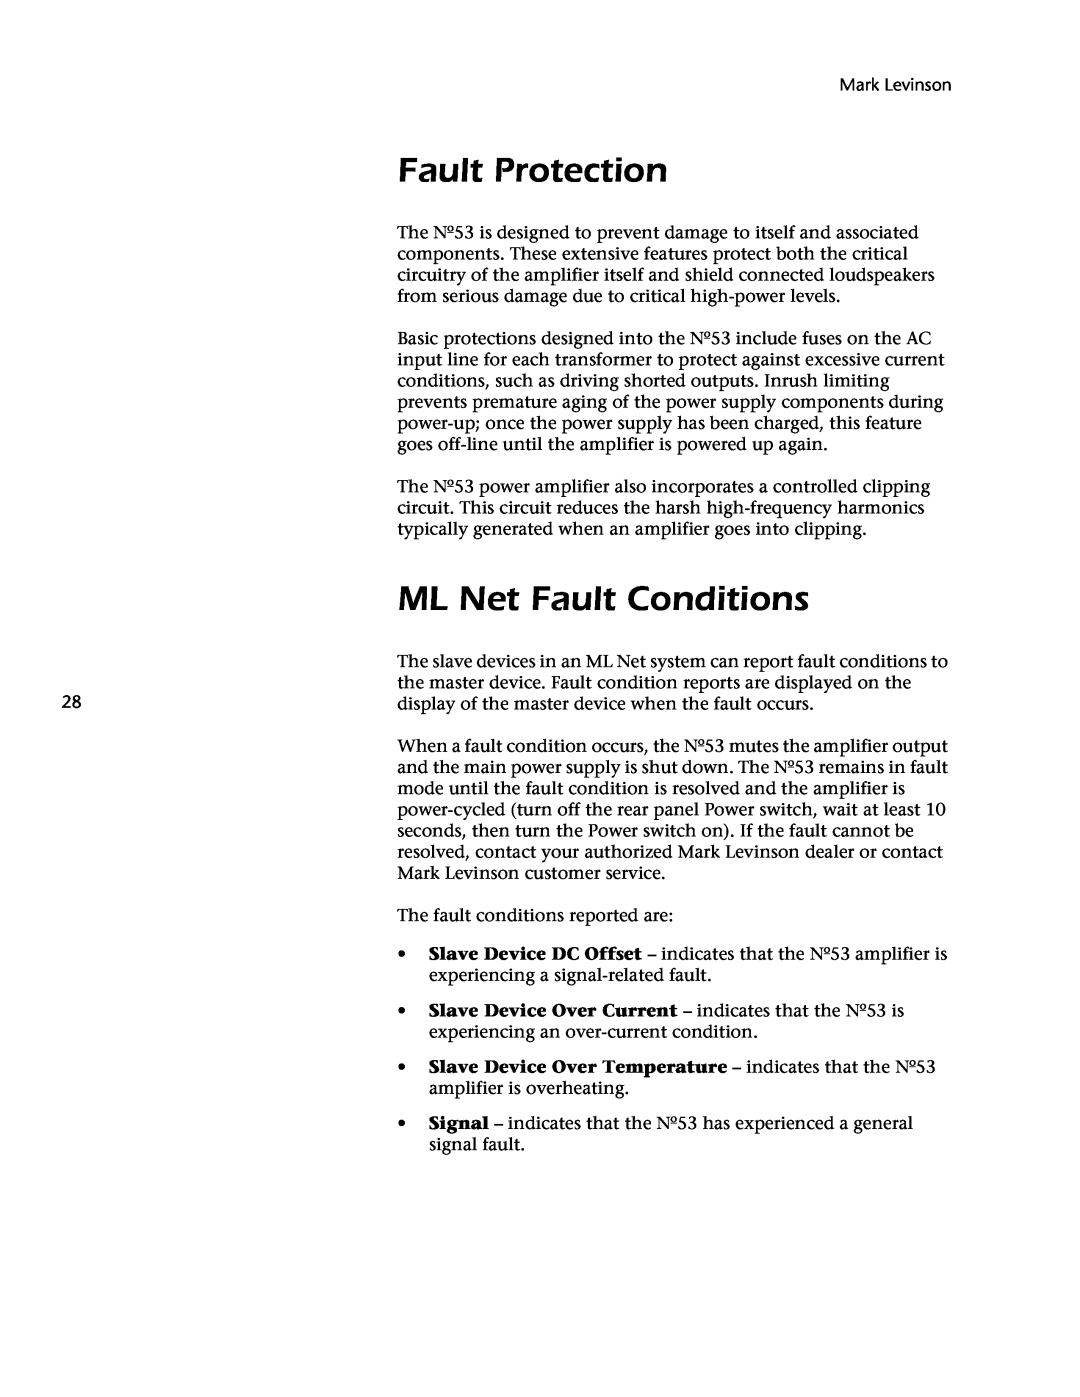 Mark Levinson 53 owner manual Fault Protection, ML Net Fault Conditions 